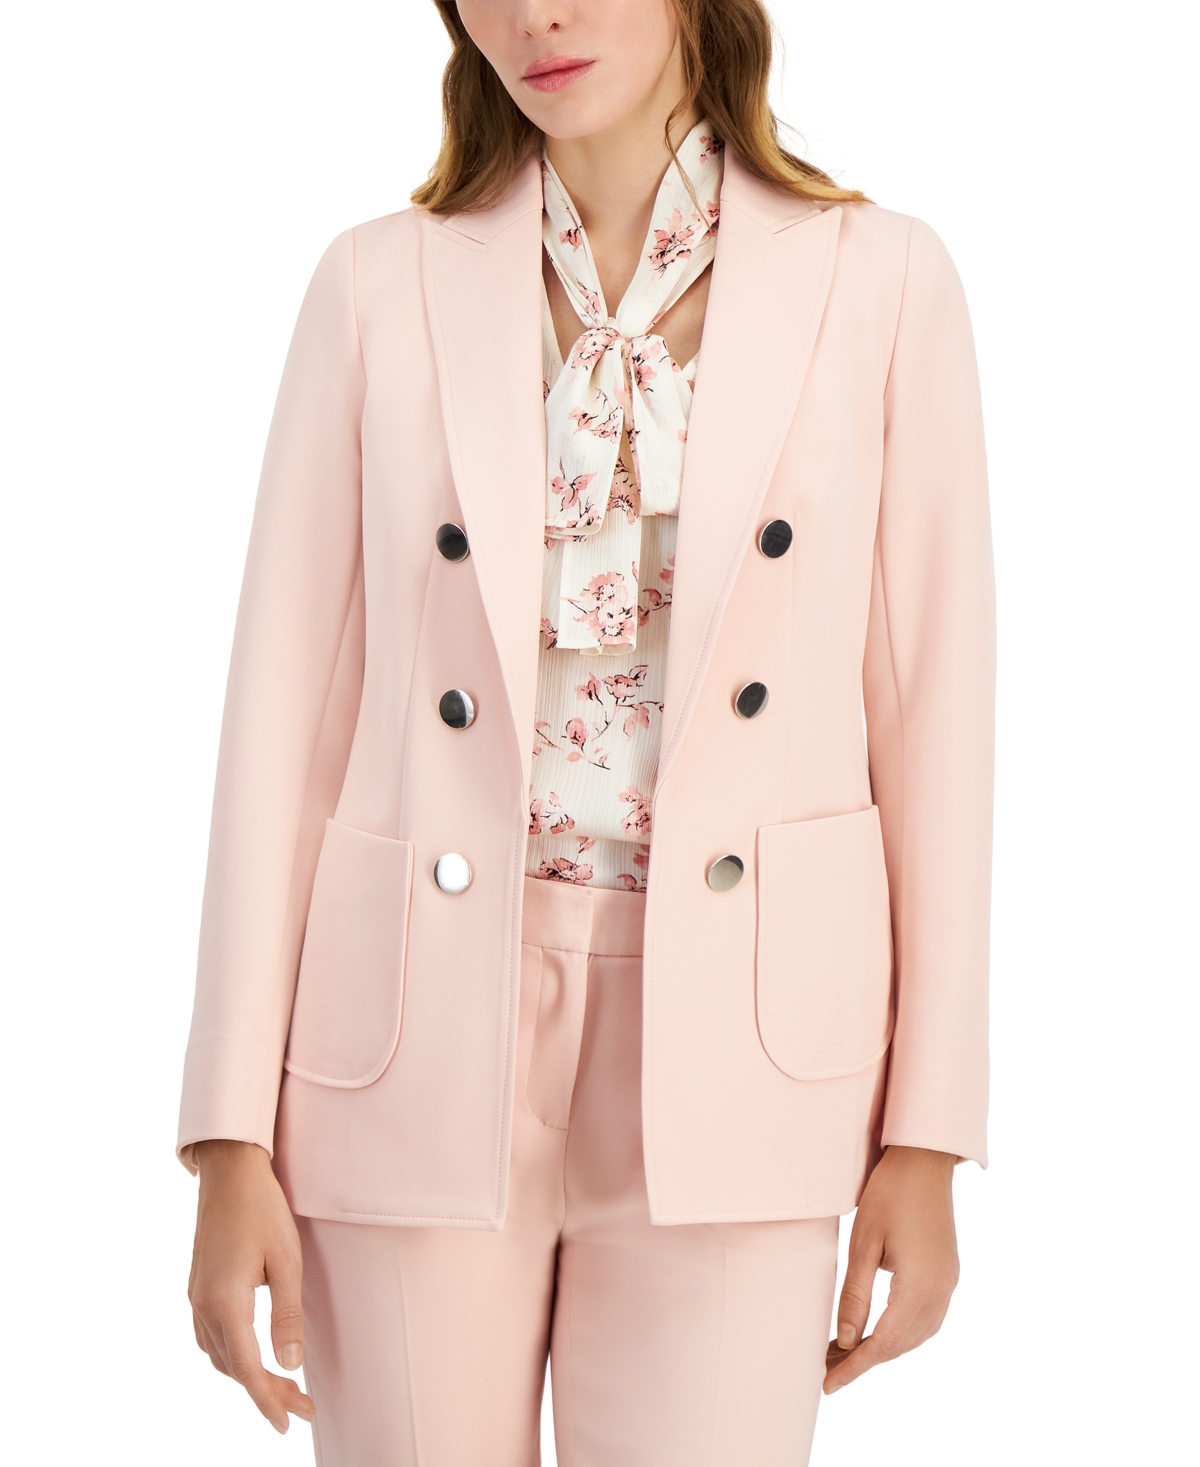 Women's Faux Double-Breasted Jacket - CHERRY BLOSSOM